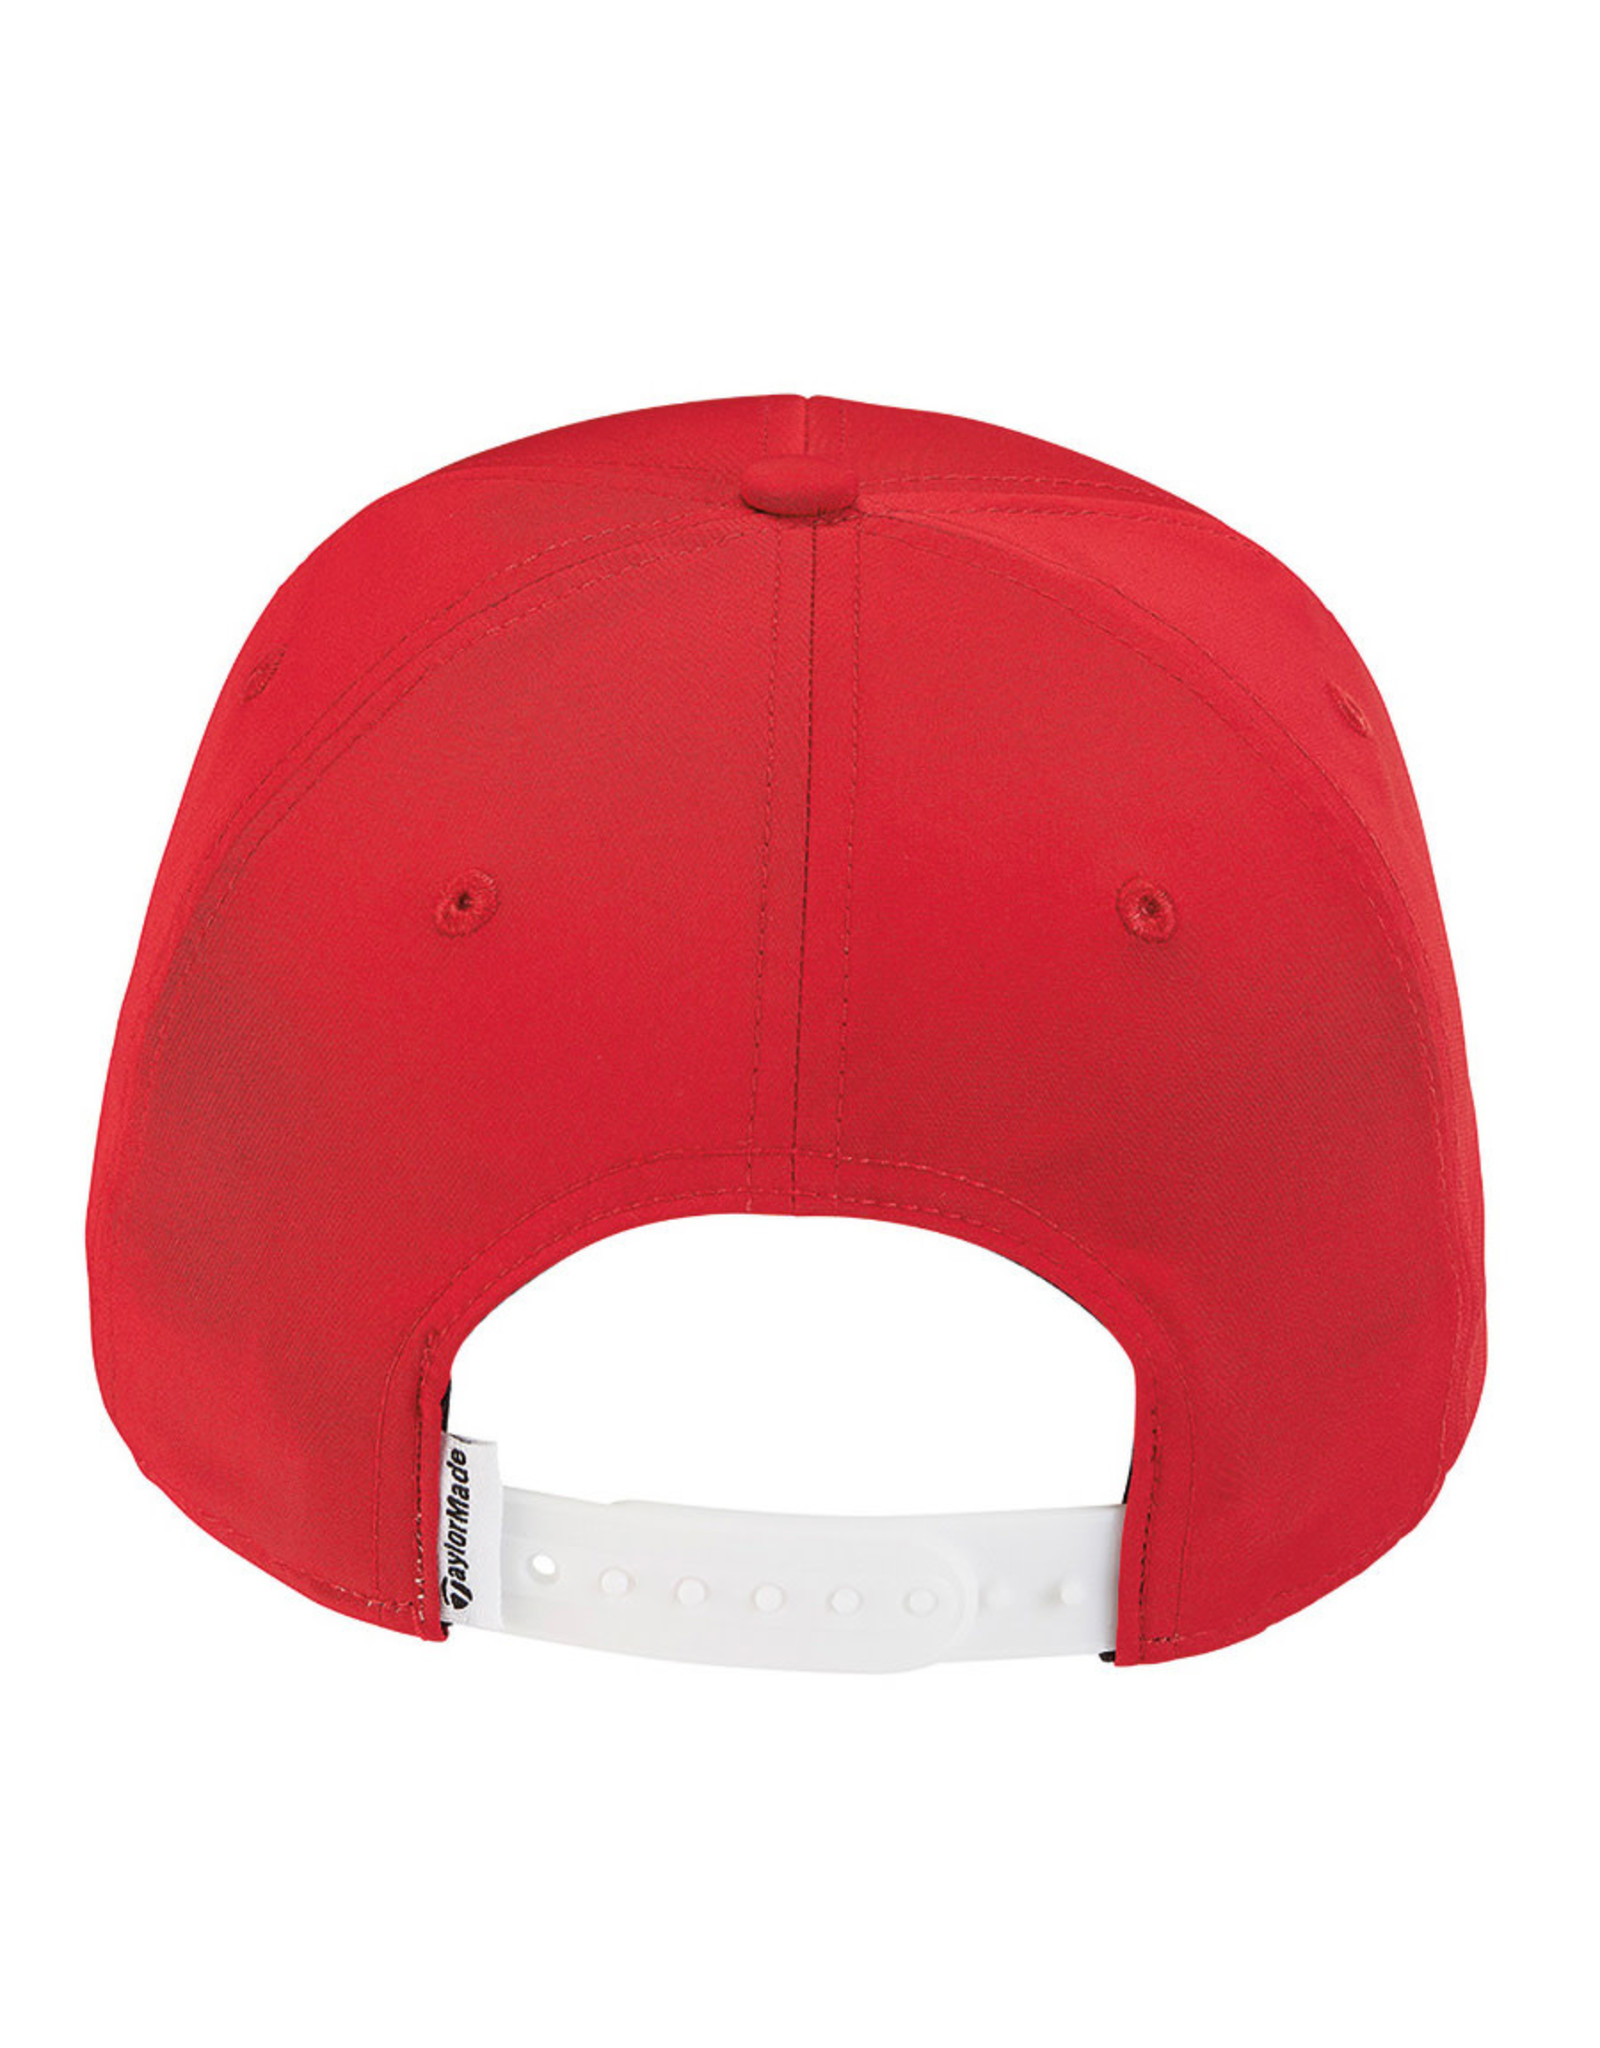 TaylorMade Lifestyle Golf Logo  Hat Red